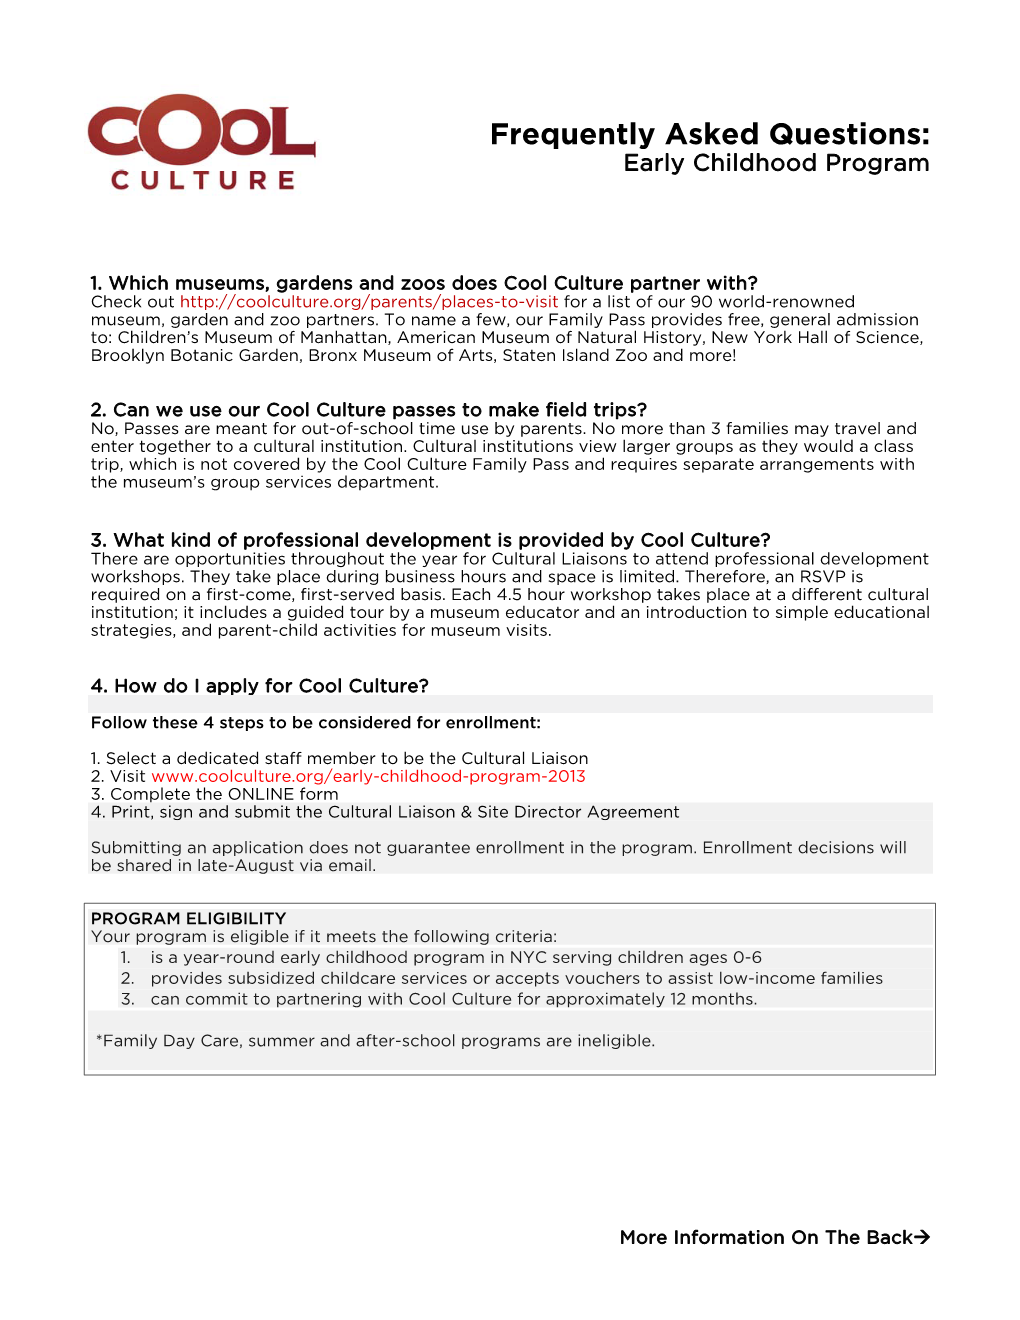 Frequently Asked Questions: Early Childhood Program